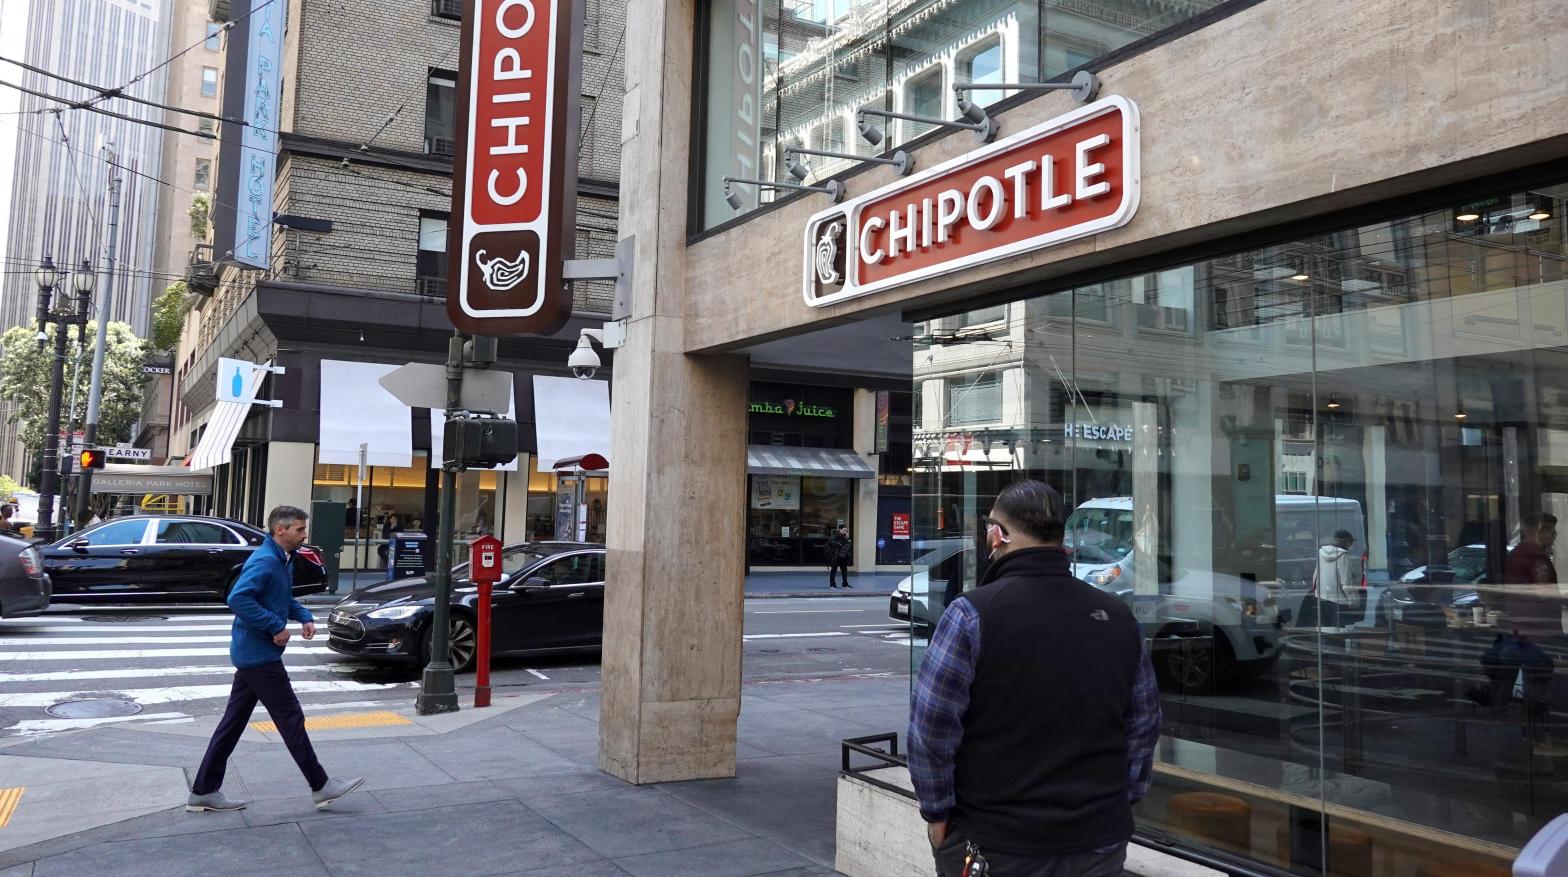 Pedestrians walk by a Chipotle restaurant on April 26, 2022 in San Francisco, California.  (Photo: Justin Sullivan, Getty Images)